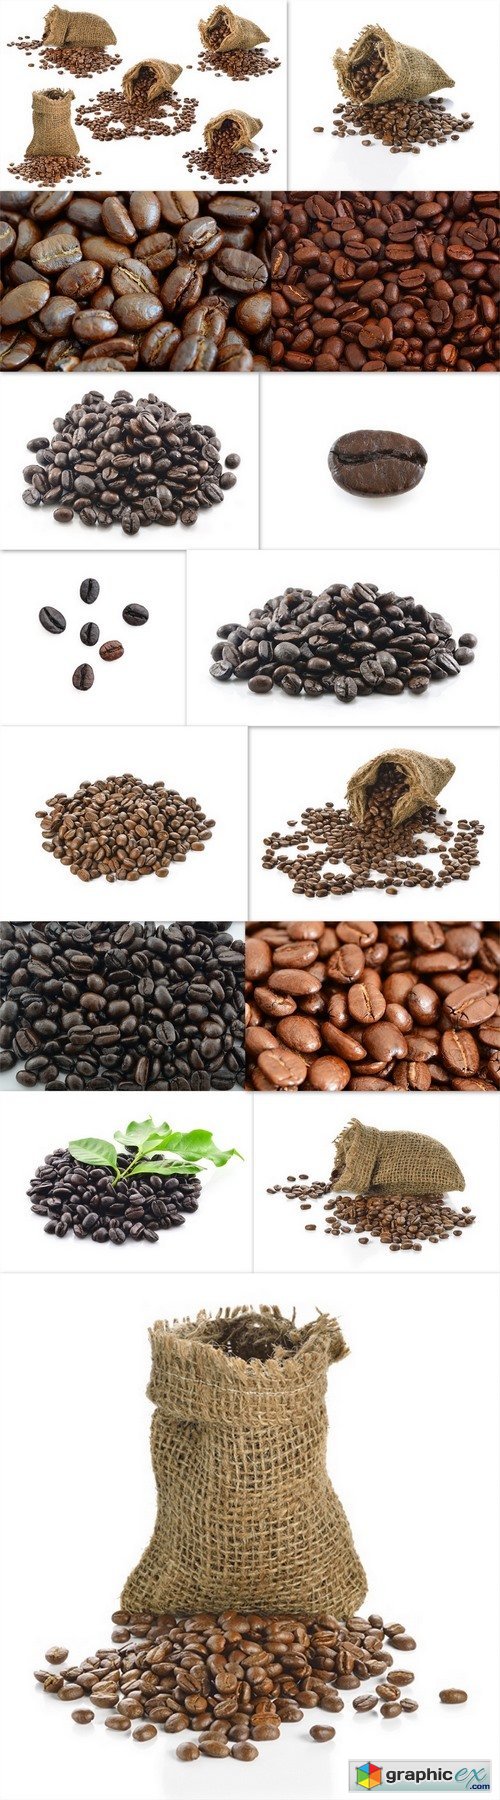 offee beans in bag isolated on white background